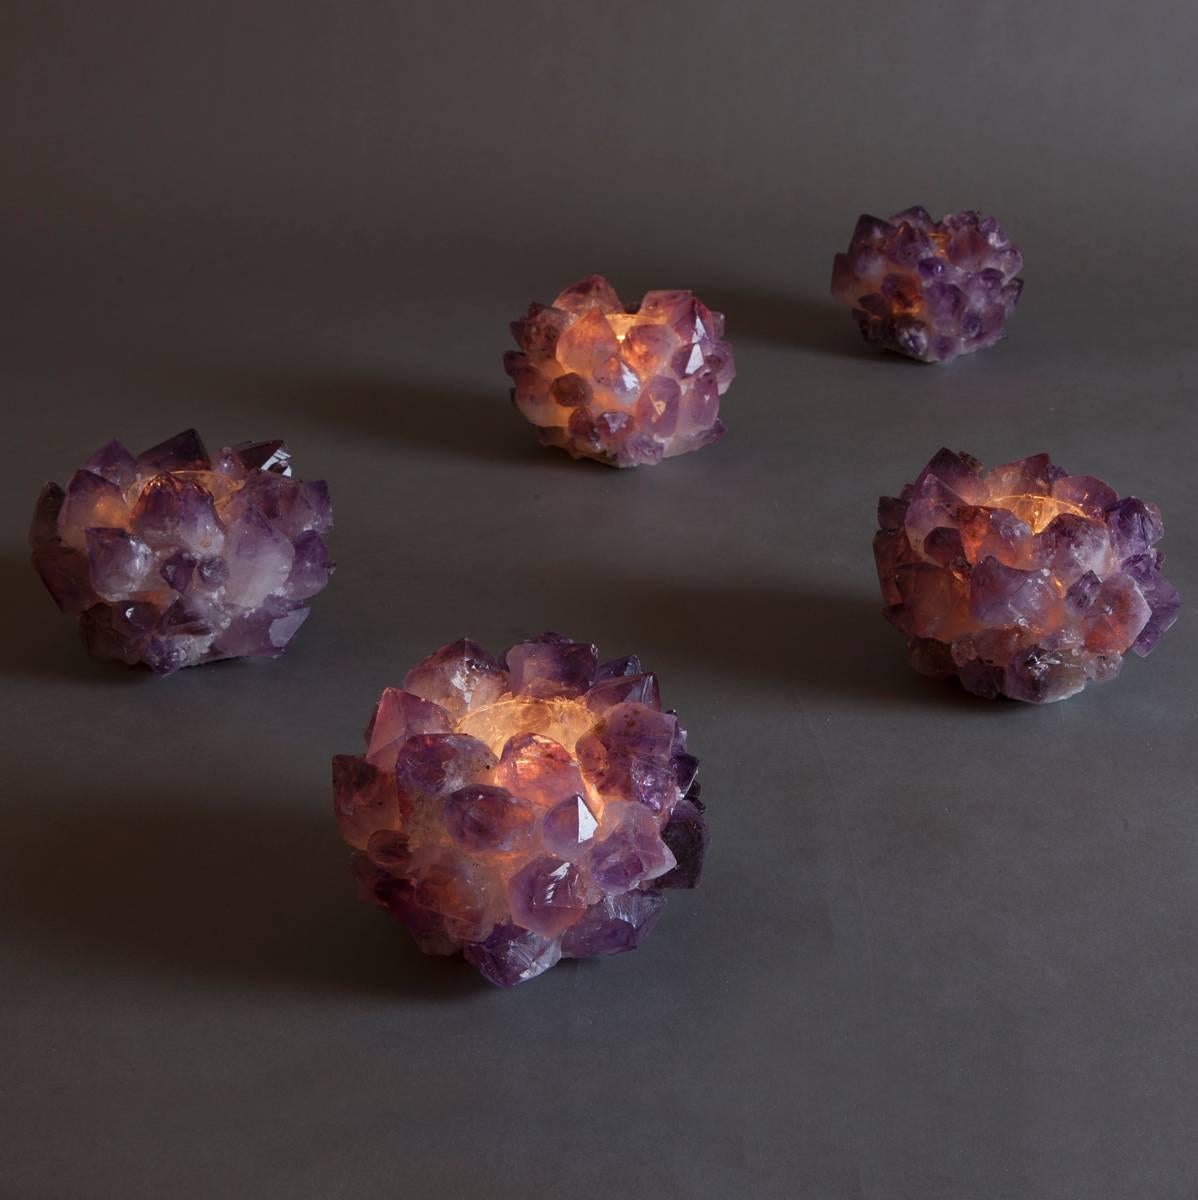 Amethyst candleholders made expressly for Liz O'Brien.
Handcrafted with large pieces of natural amethyst crystal. Beautiful singly or as a group on dining tables or larger arrangements.